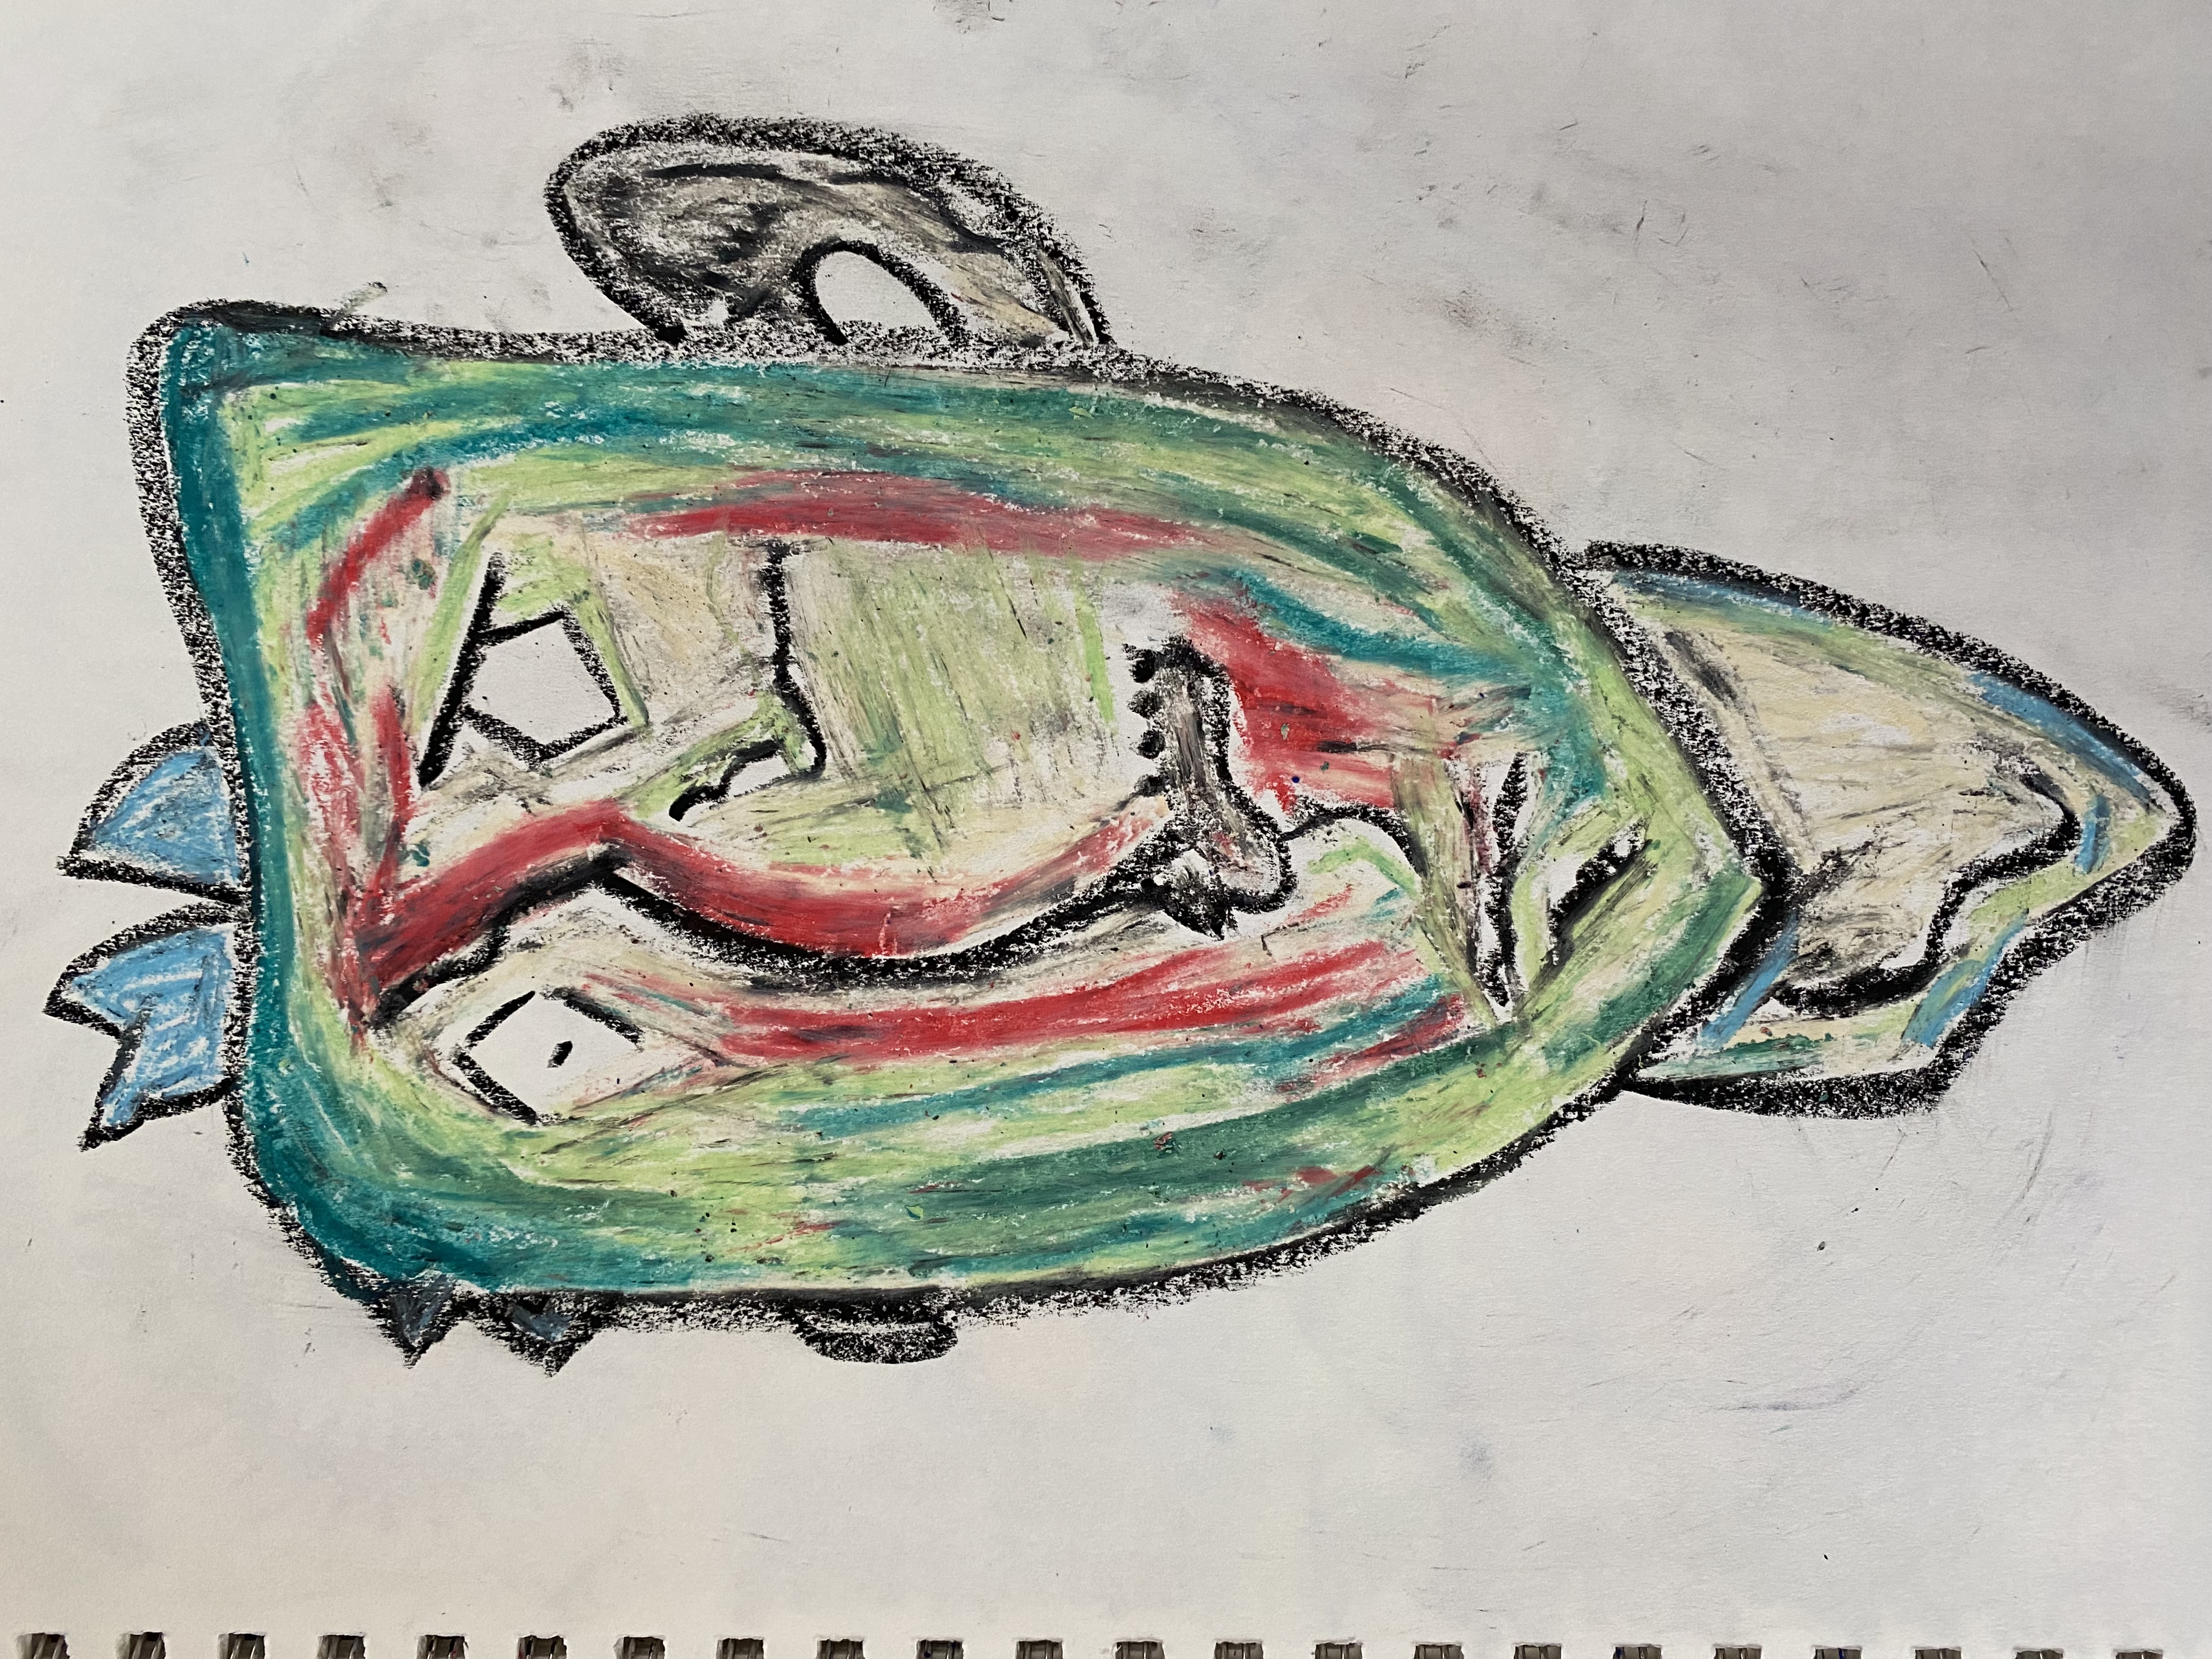 sketch of an odd man's face using oil pastels with sharp and curved lines. once jokingly referred to as watermelon man.